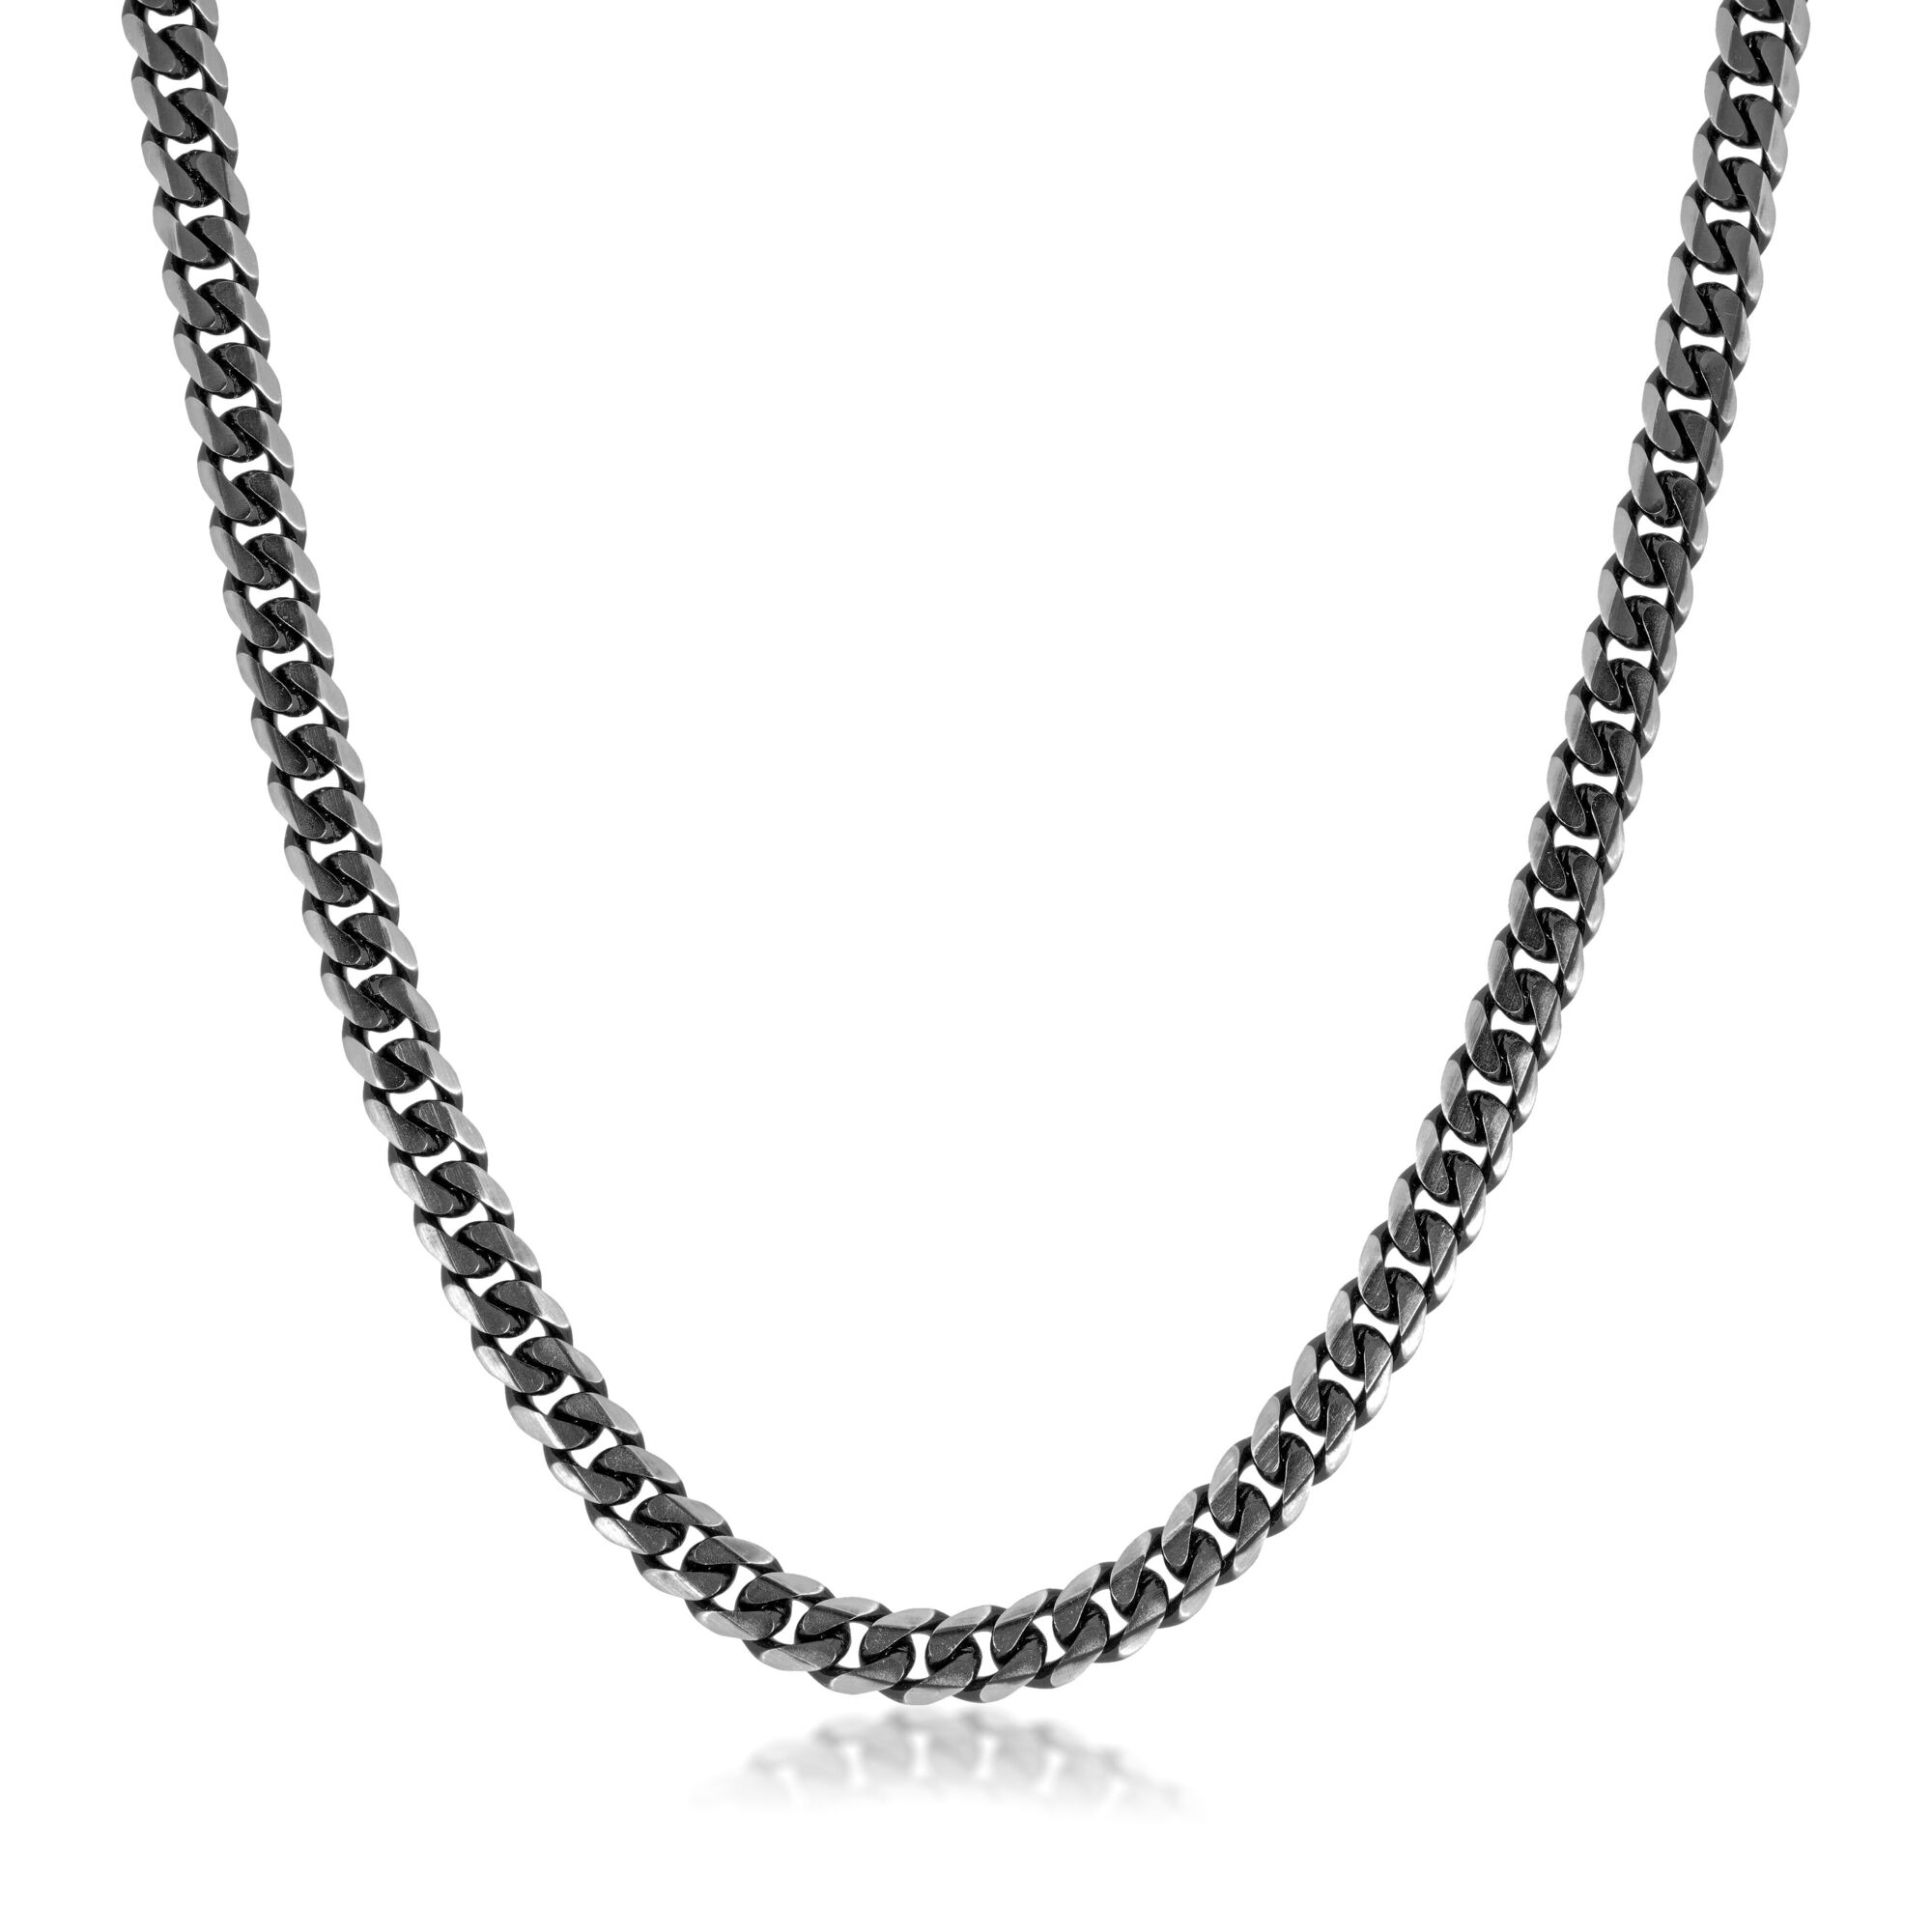 Men's Black Ion Plated Stainless Steel 8MM Gourmette Chain Necklace - 22 Inch | Metro Jewelry